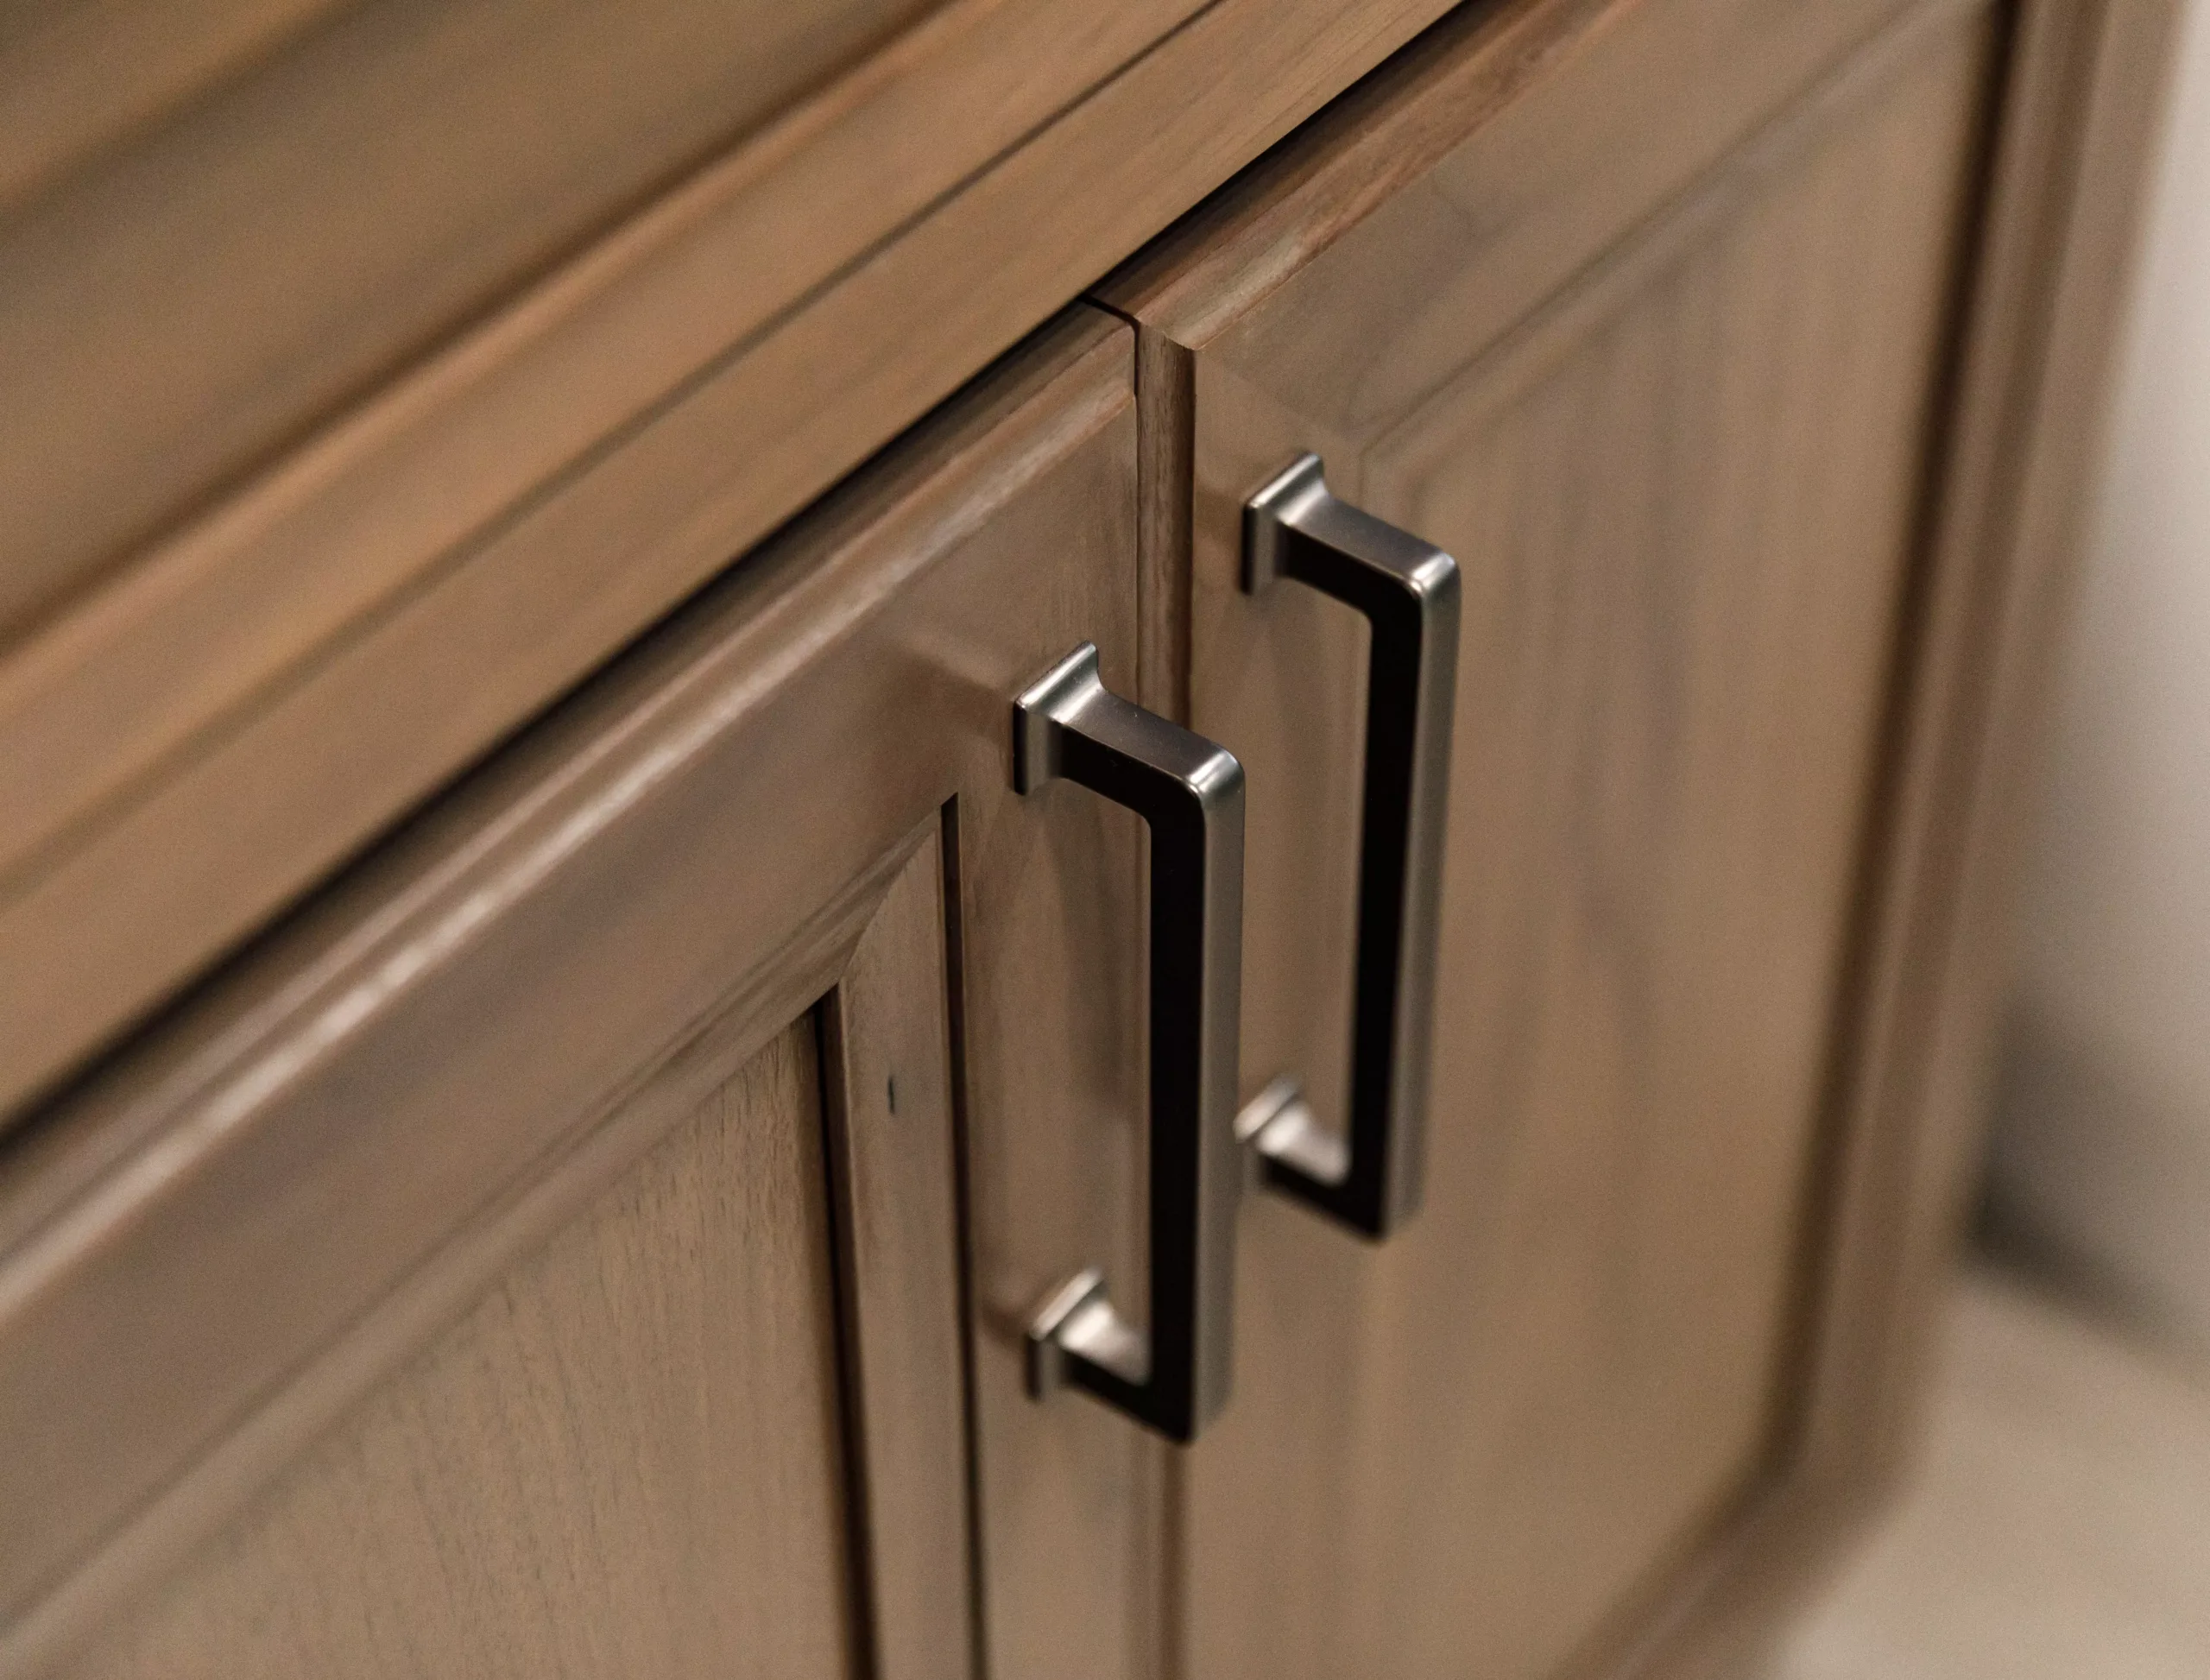 This close up showcases a beautifully crafted wooden cabinet, adorned with sleek metal handles.